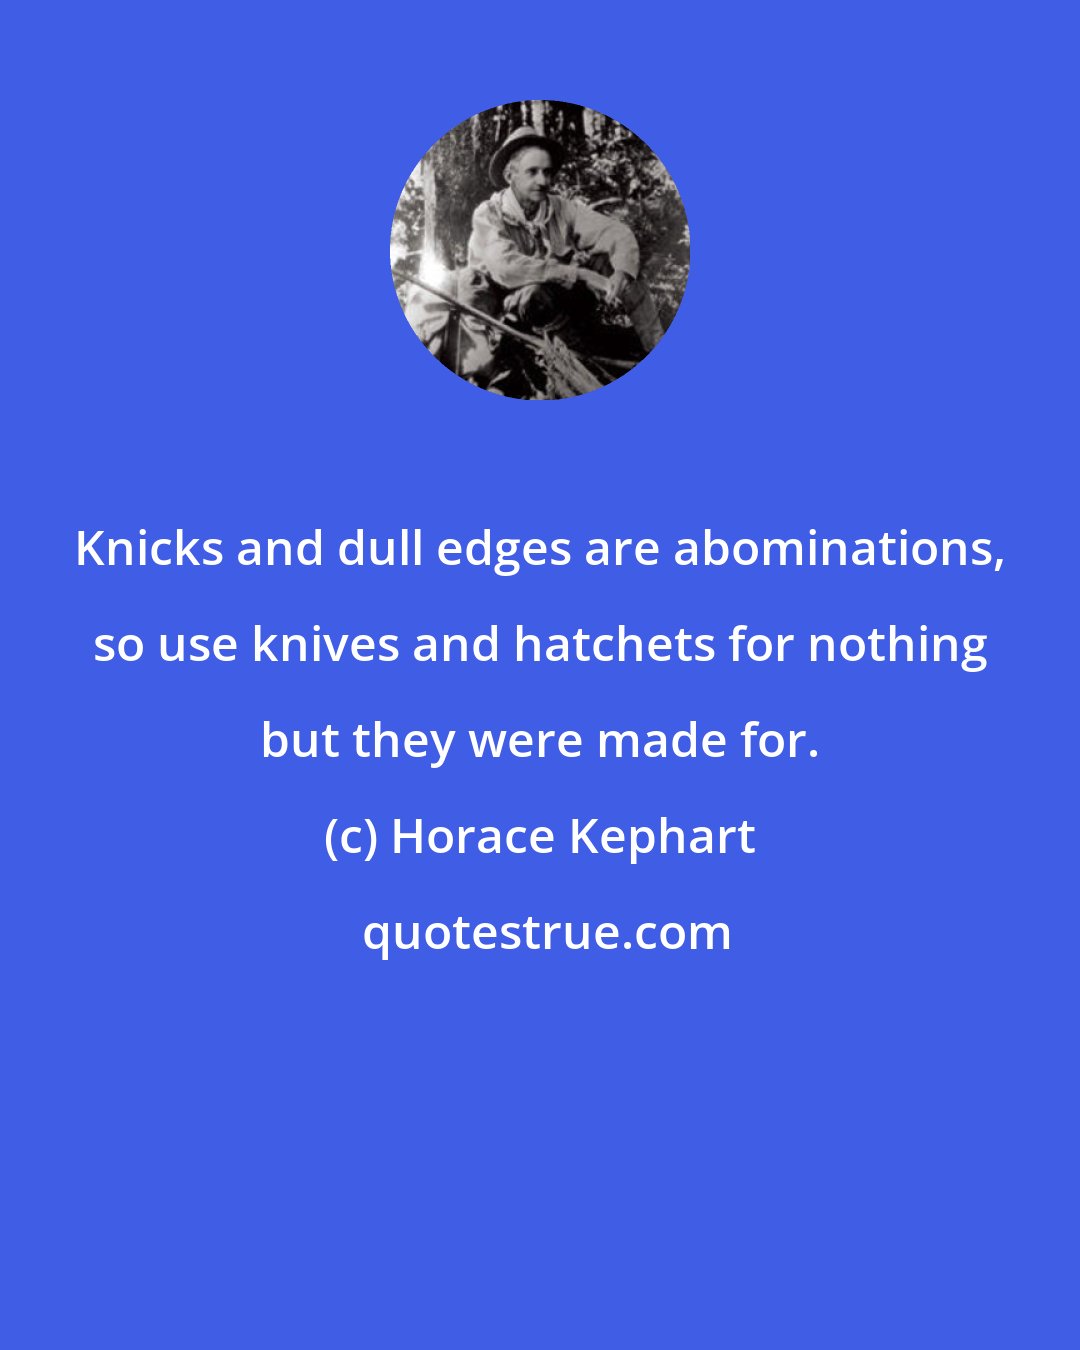 Horace Kephart: Knicks and dull edges are abominations, so use knives and hatchets for nothing but they were made for.